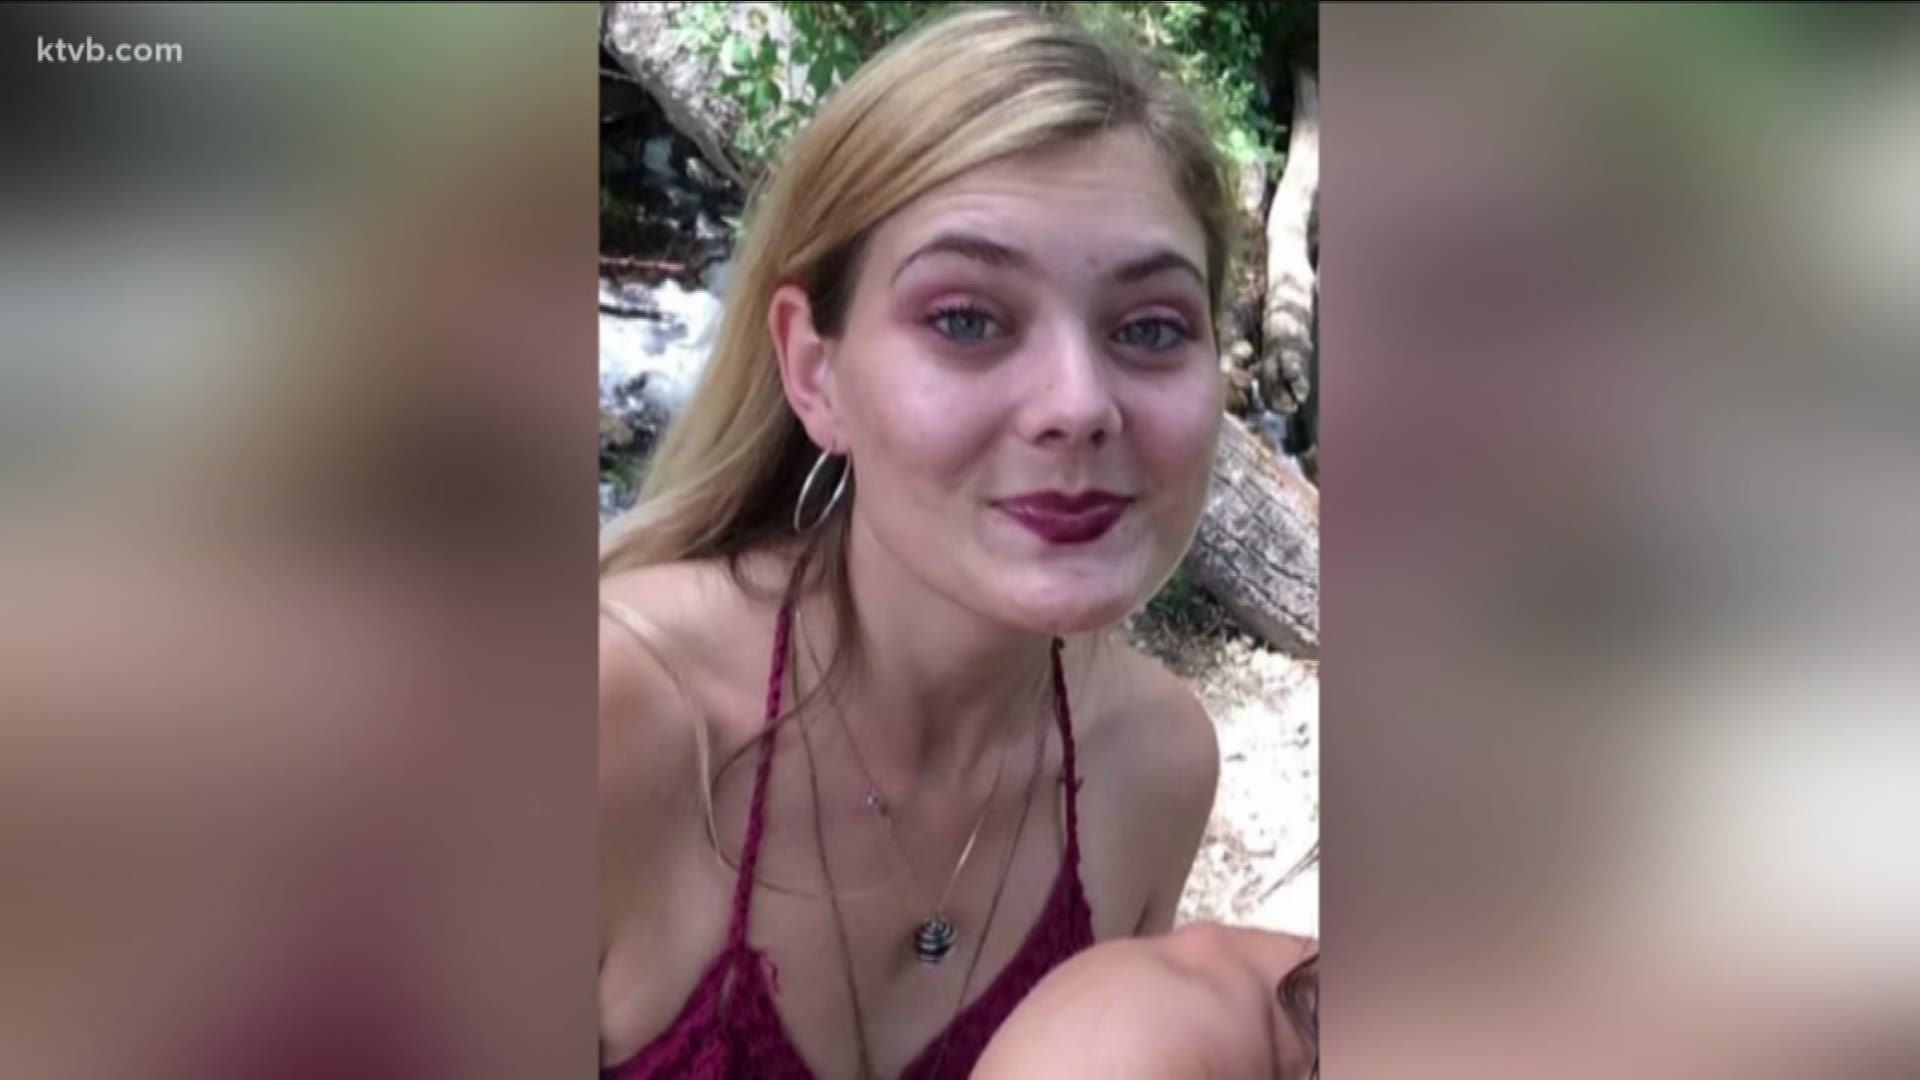 The free festival is aimed at reducing violence, healing from trauma and supporting people through life transitions. The festival was born out of a tragedy that happened in that very community. In March of 2018, 22-year-old Kym Larsen died after a former boyfriend stabbed her to death.